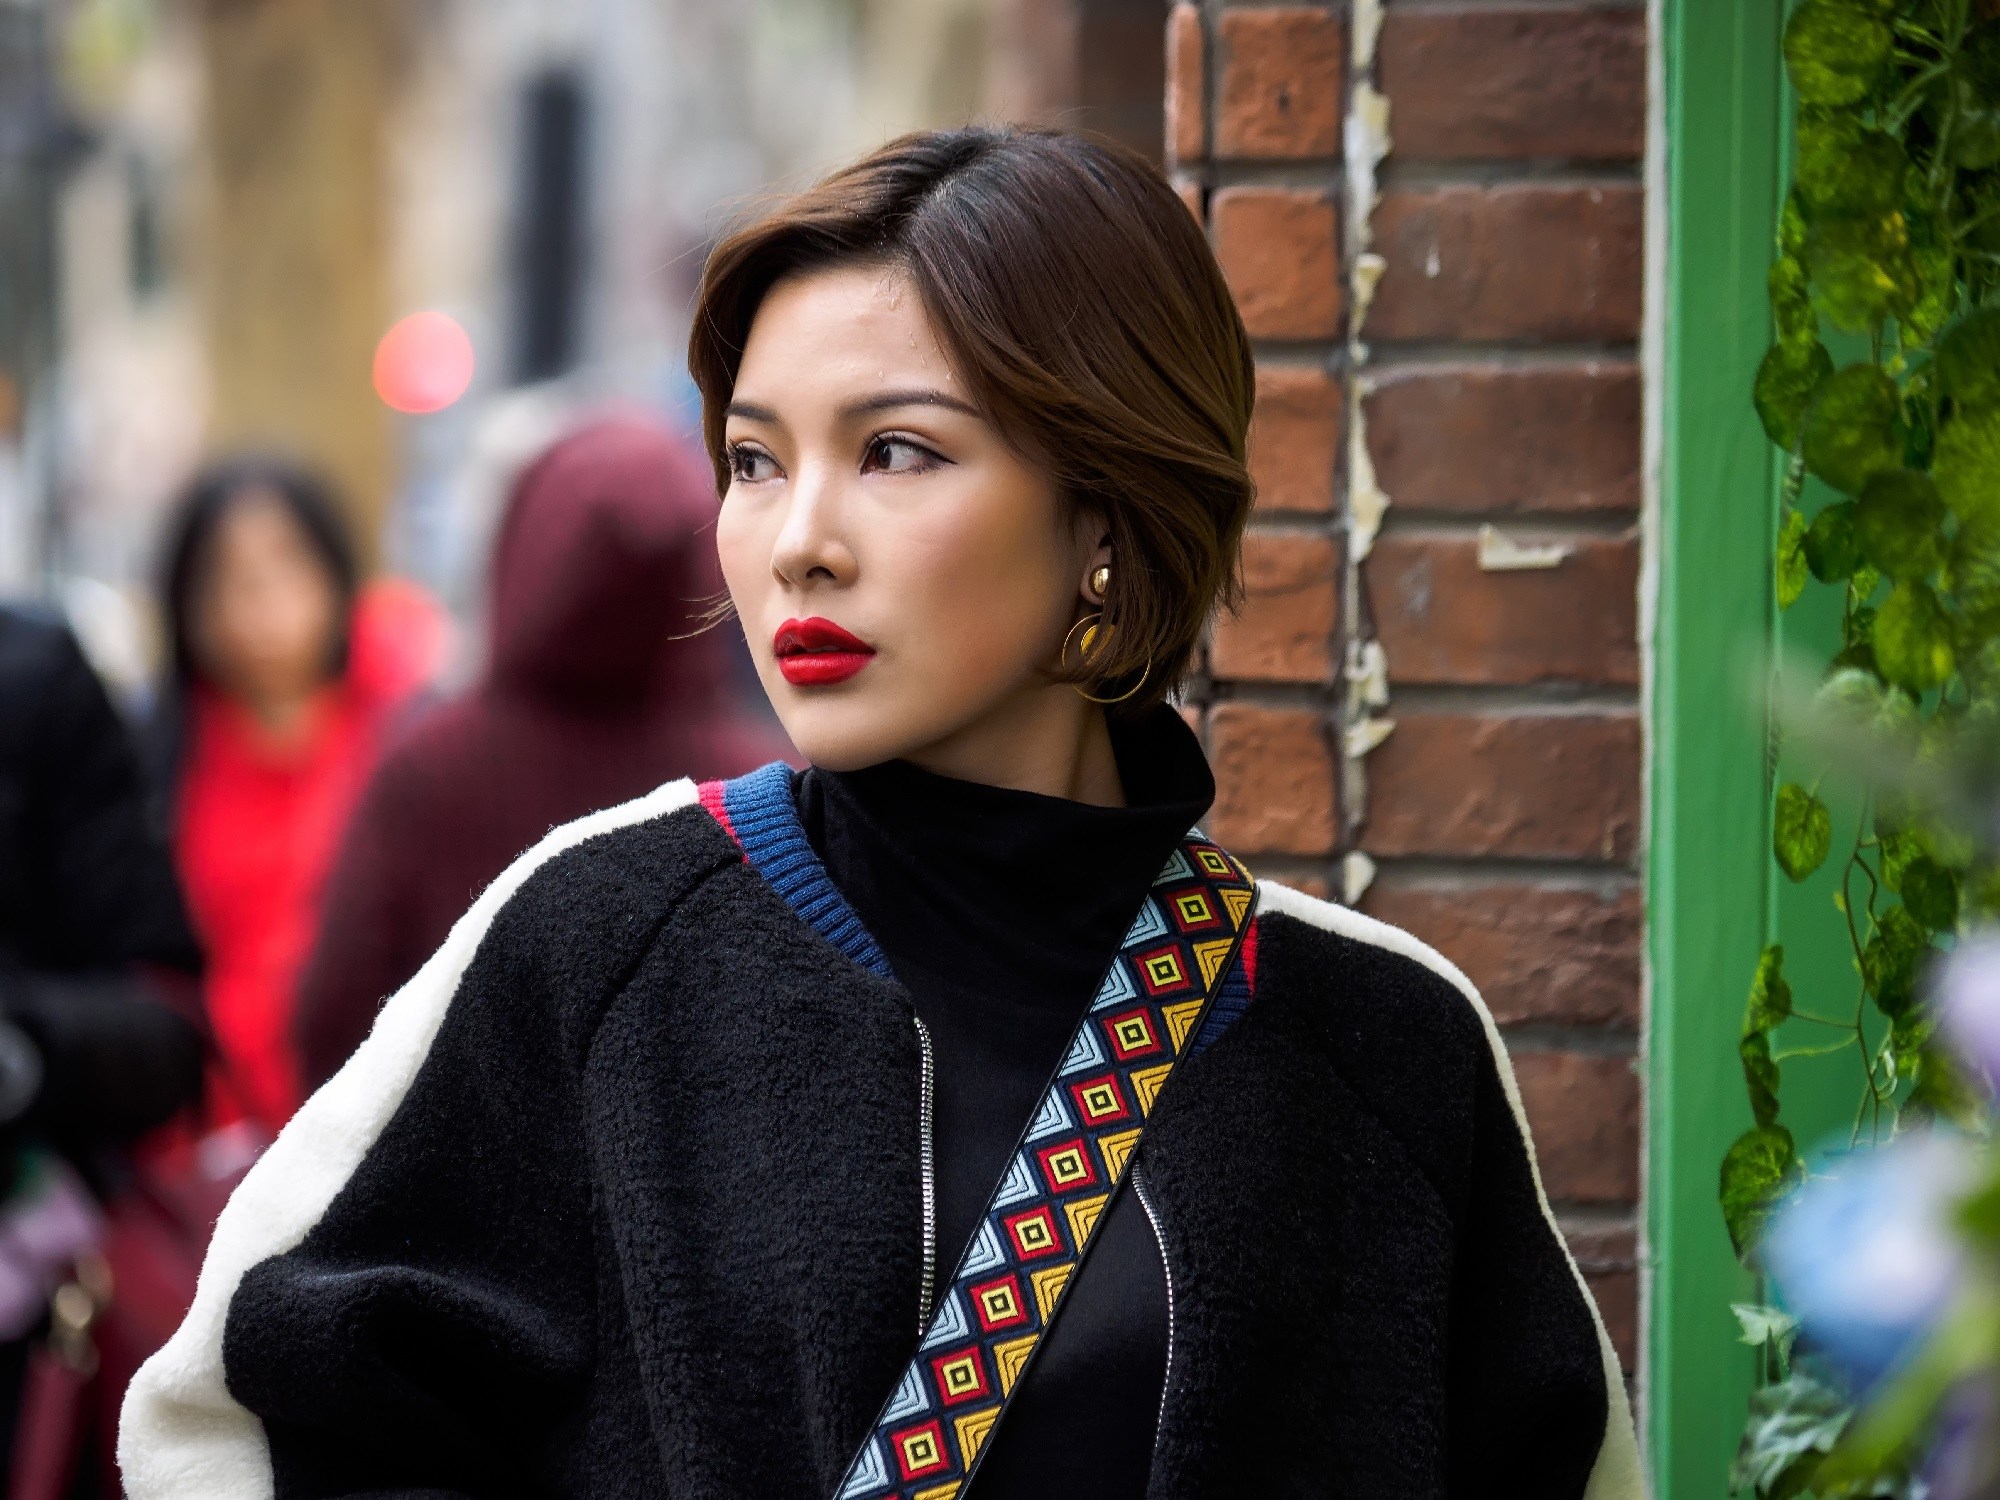 Korean Shoulder Length Hairstyles for Women: 10 Styles to Stun Everyone